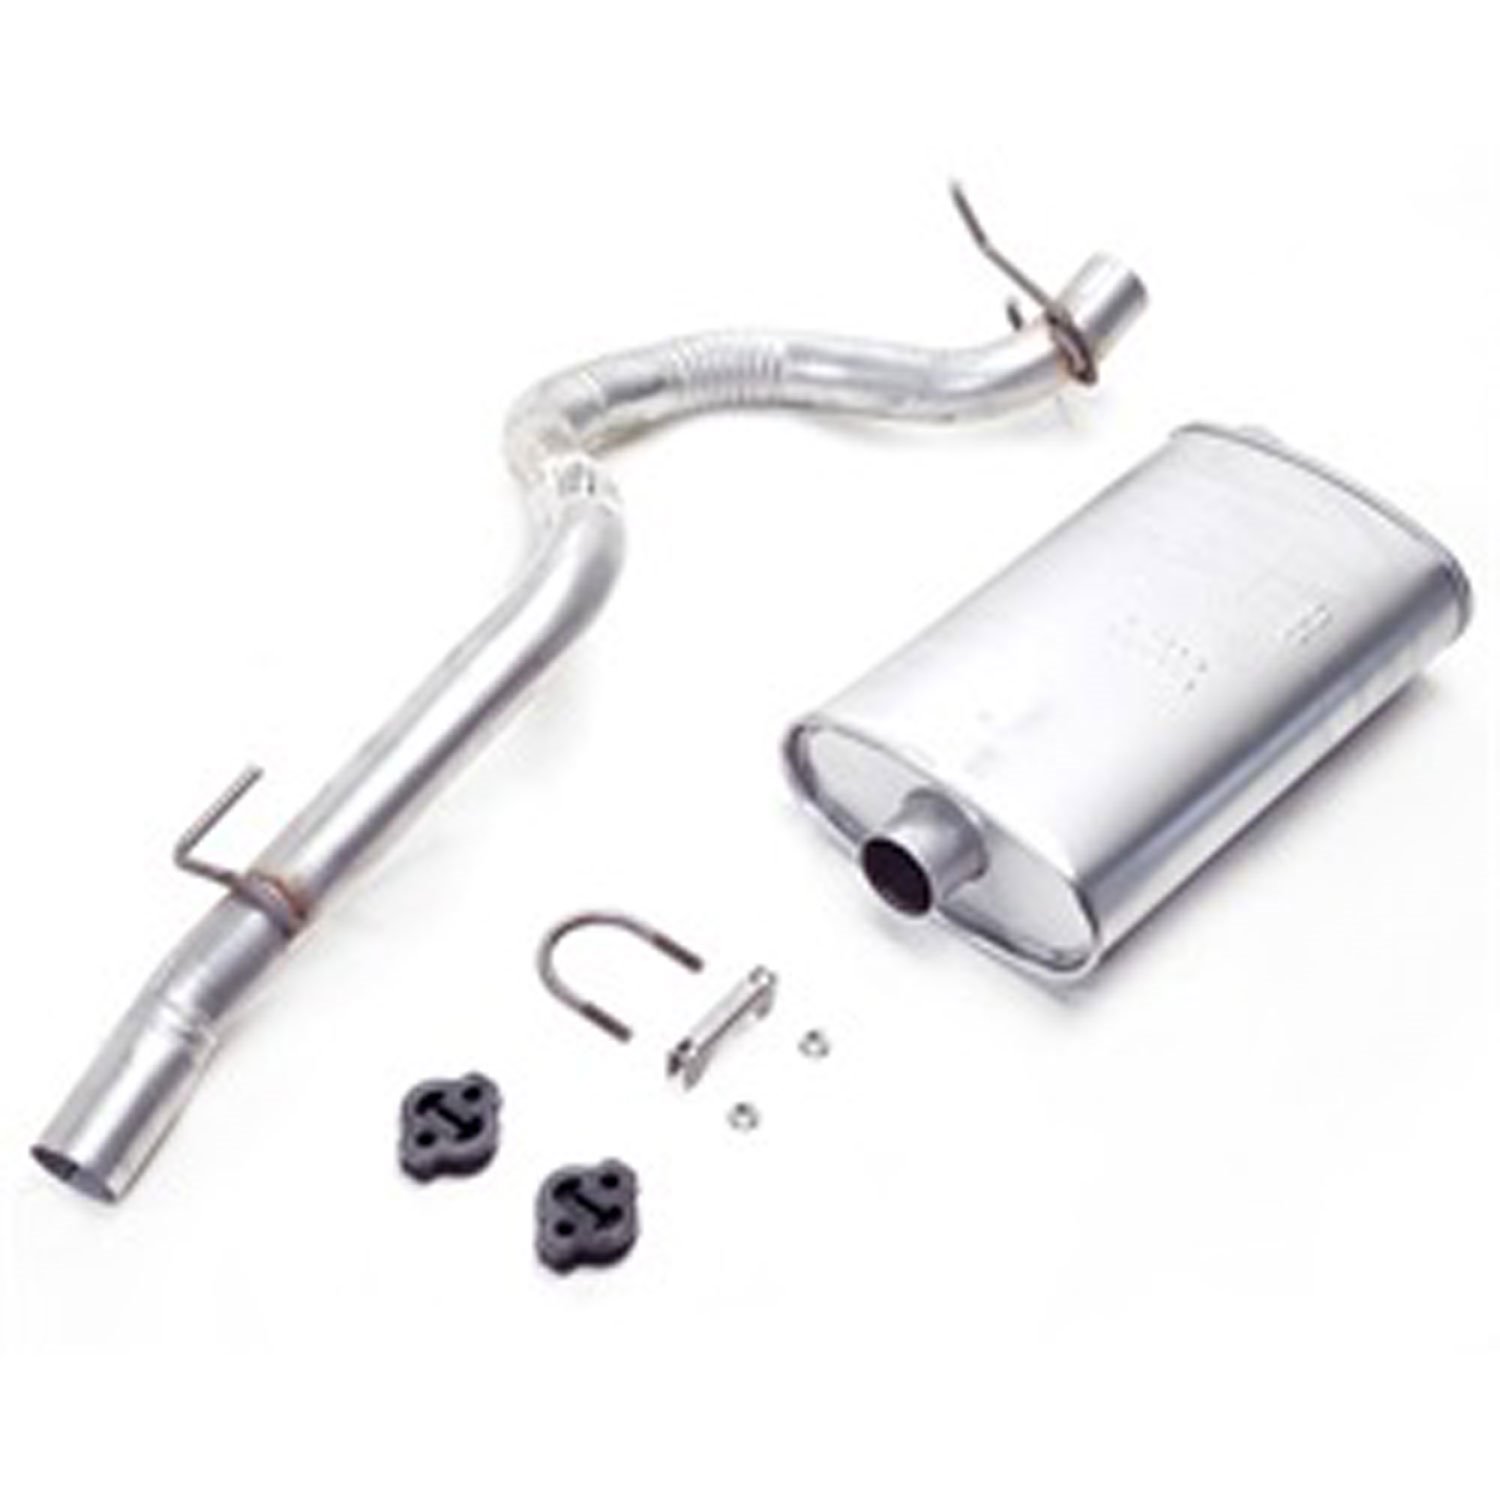 Muffler and Tailpipe Kit Includes Clamps and Hangers 1993-1995 Wrangler 2.5L and 4.0L